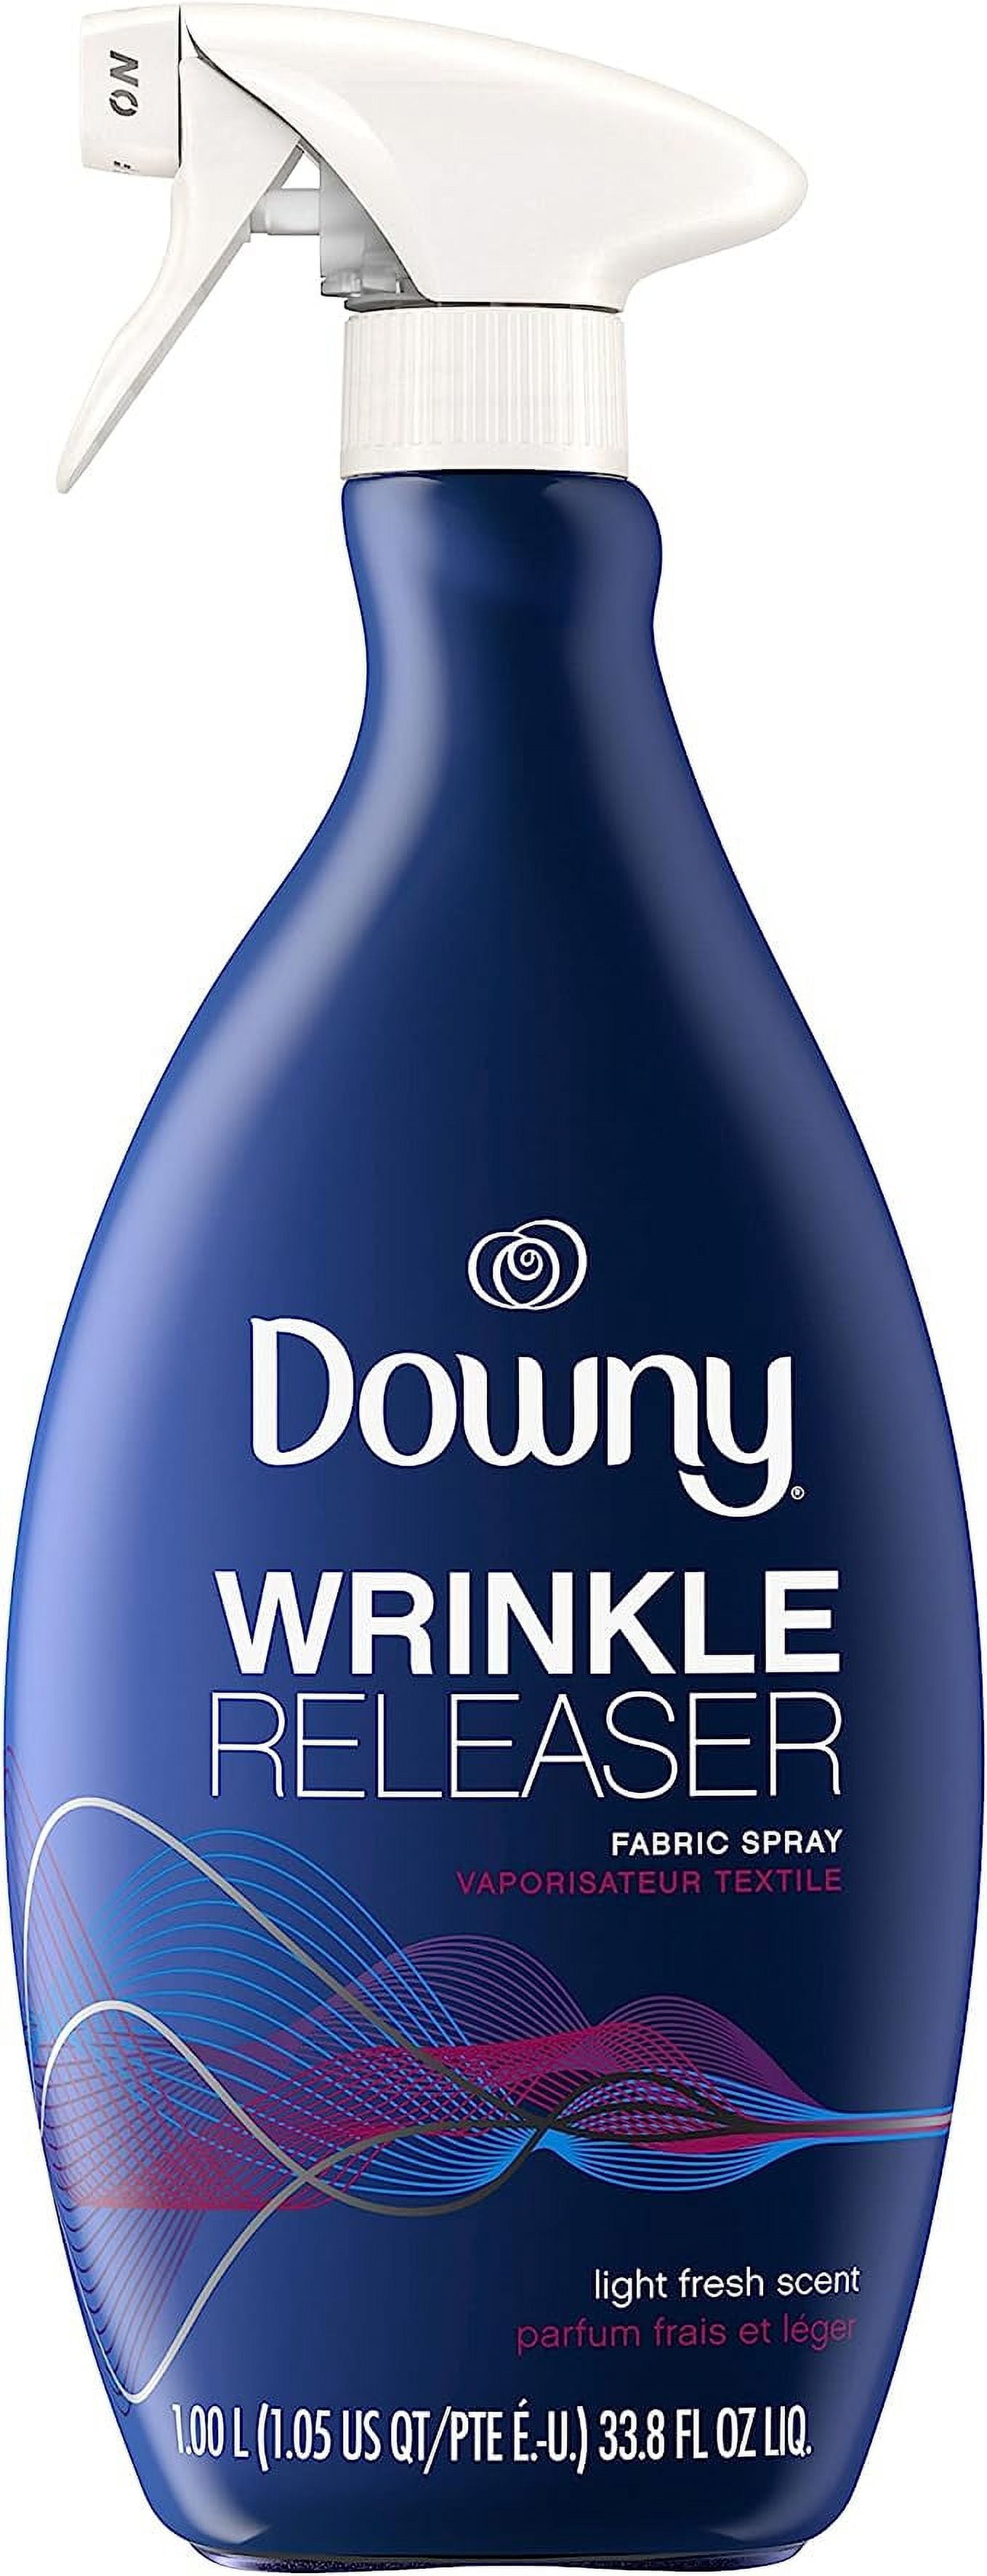 Downy Wrinkle Release Spray Plus, Static Remover, Light Fresh Scent, 33.8  Fluid Ounce, Pack of 2